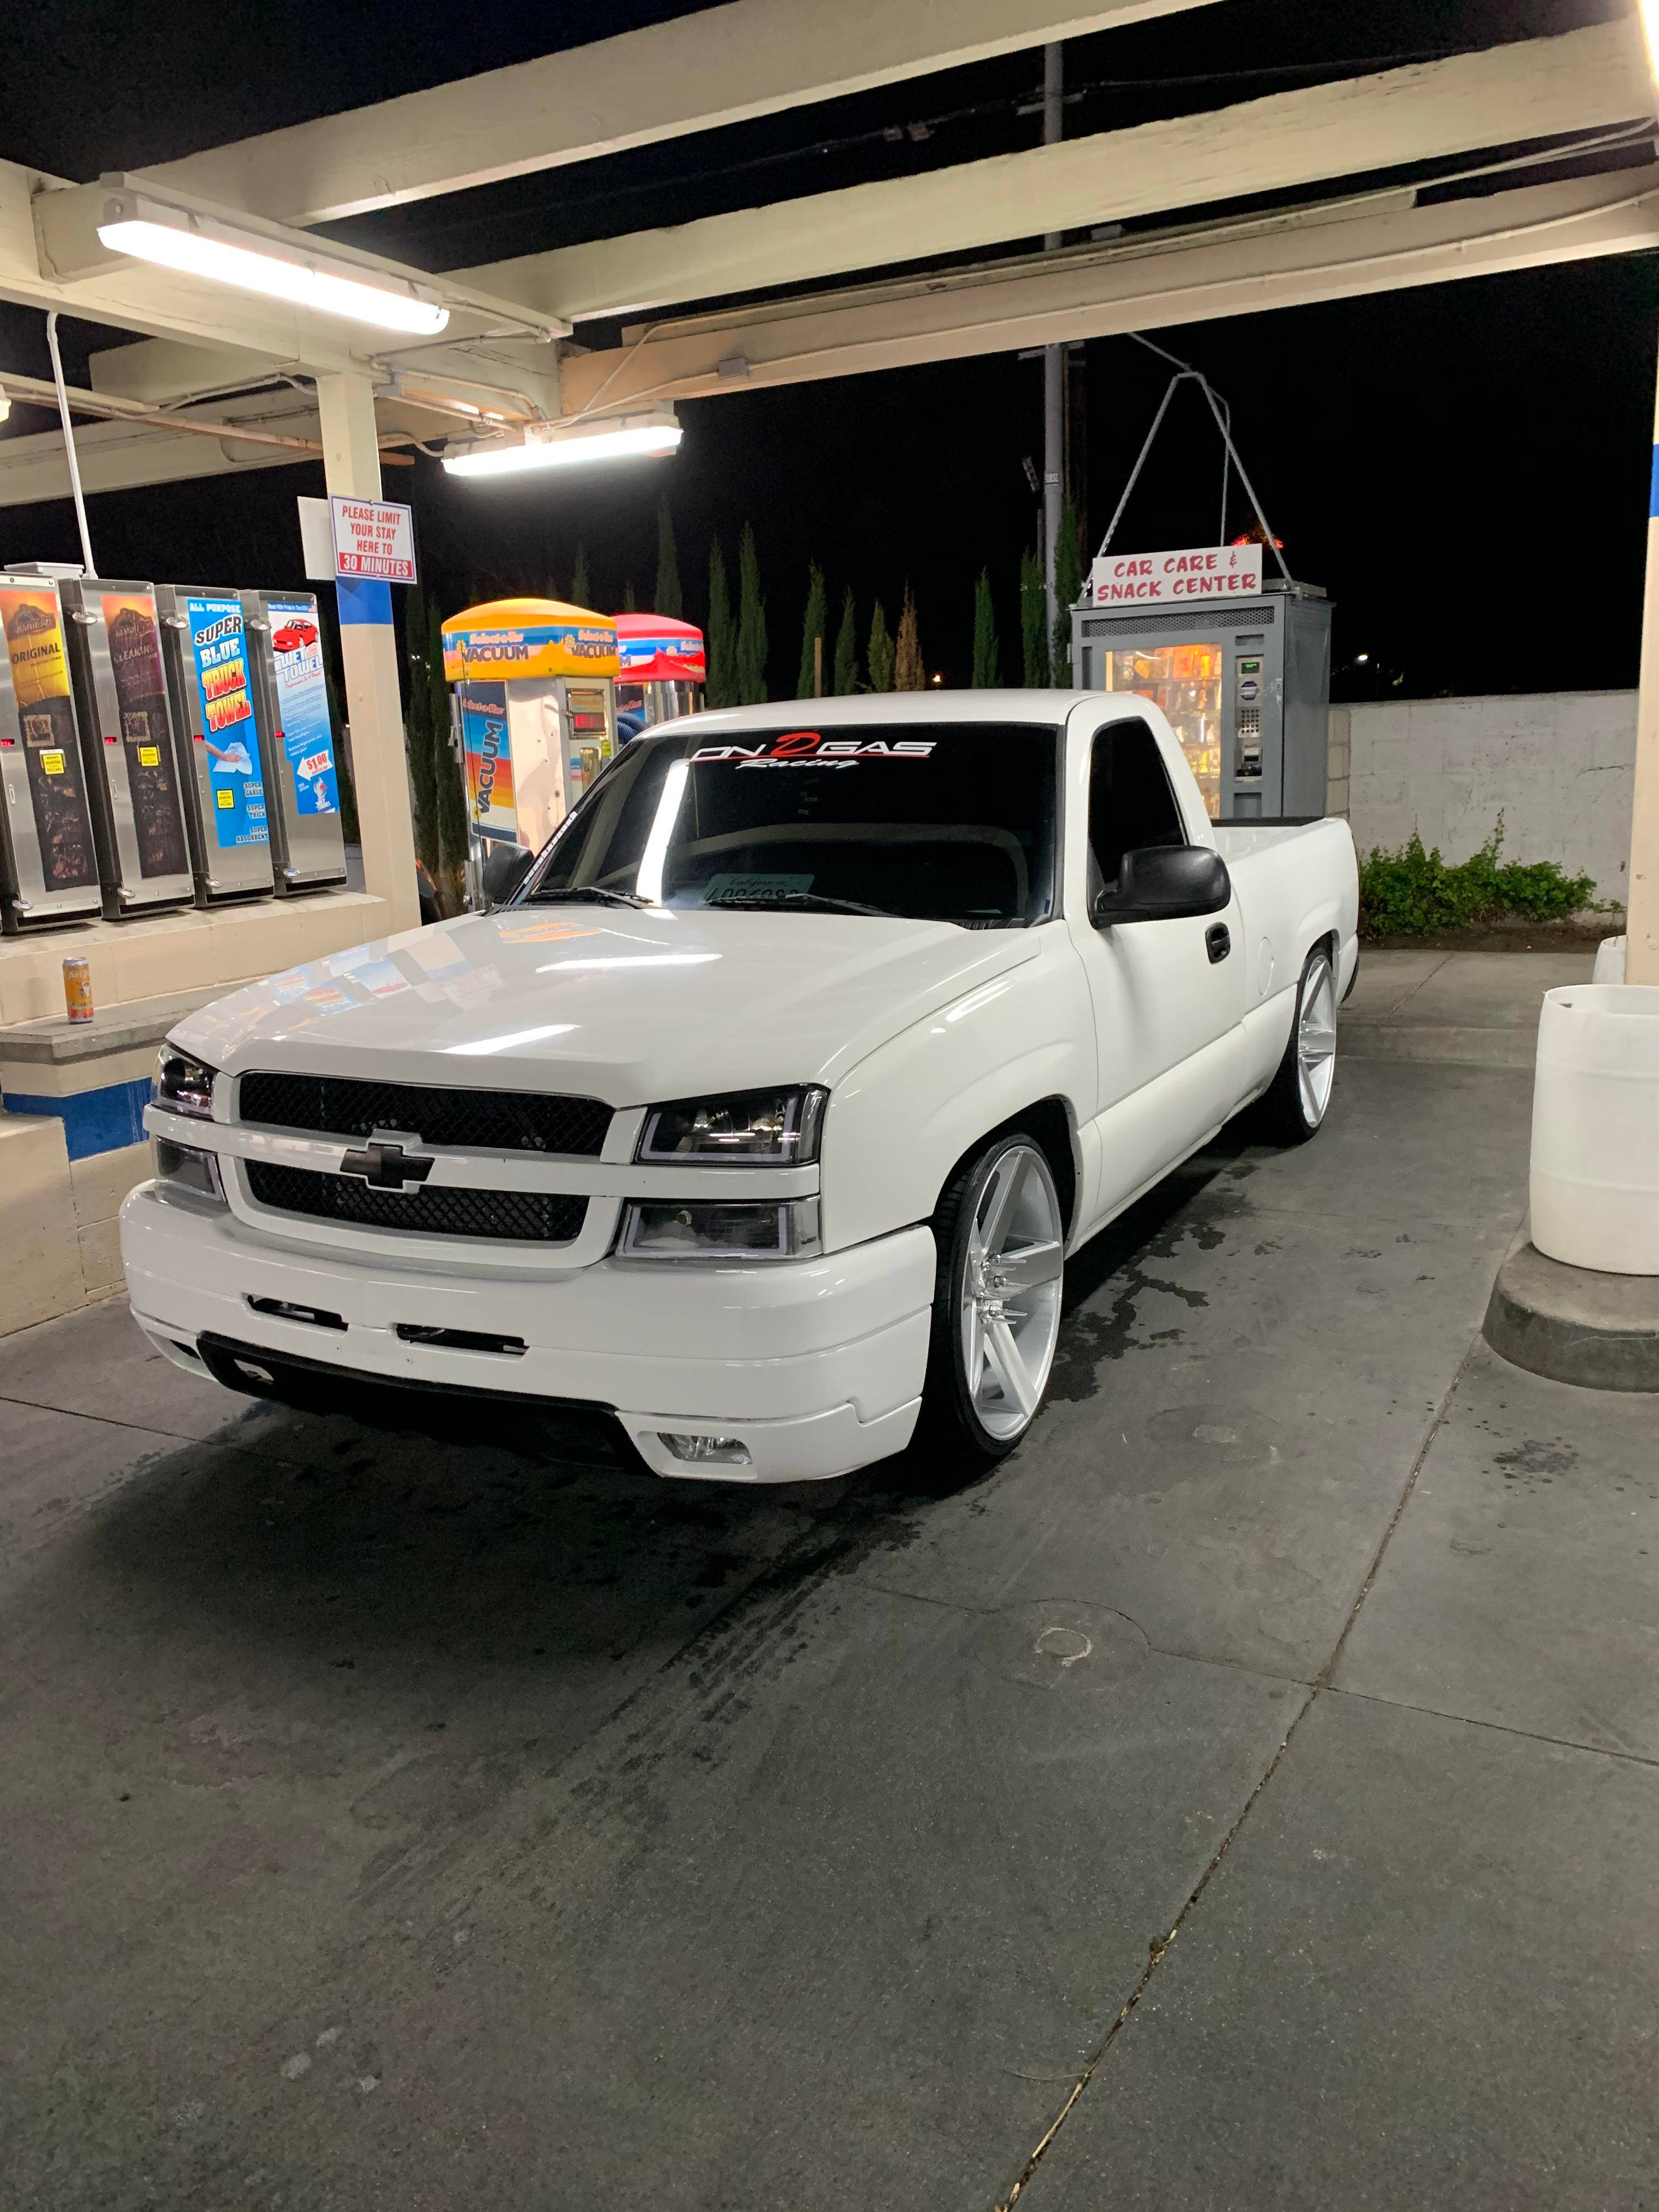 Bulky White Dropped Truck Background